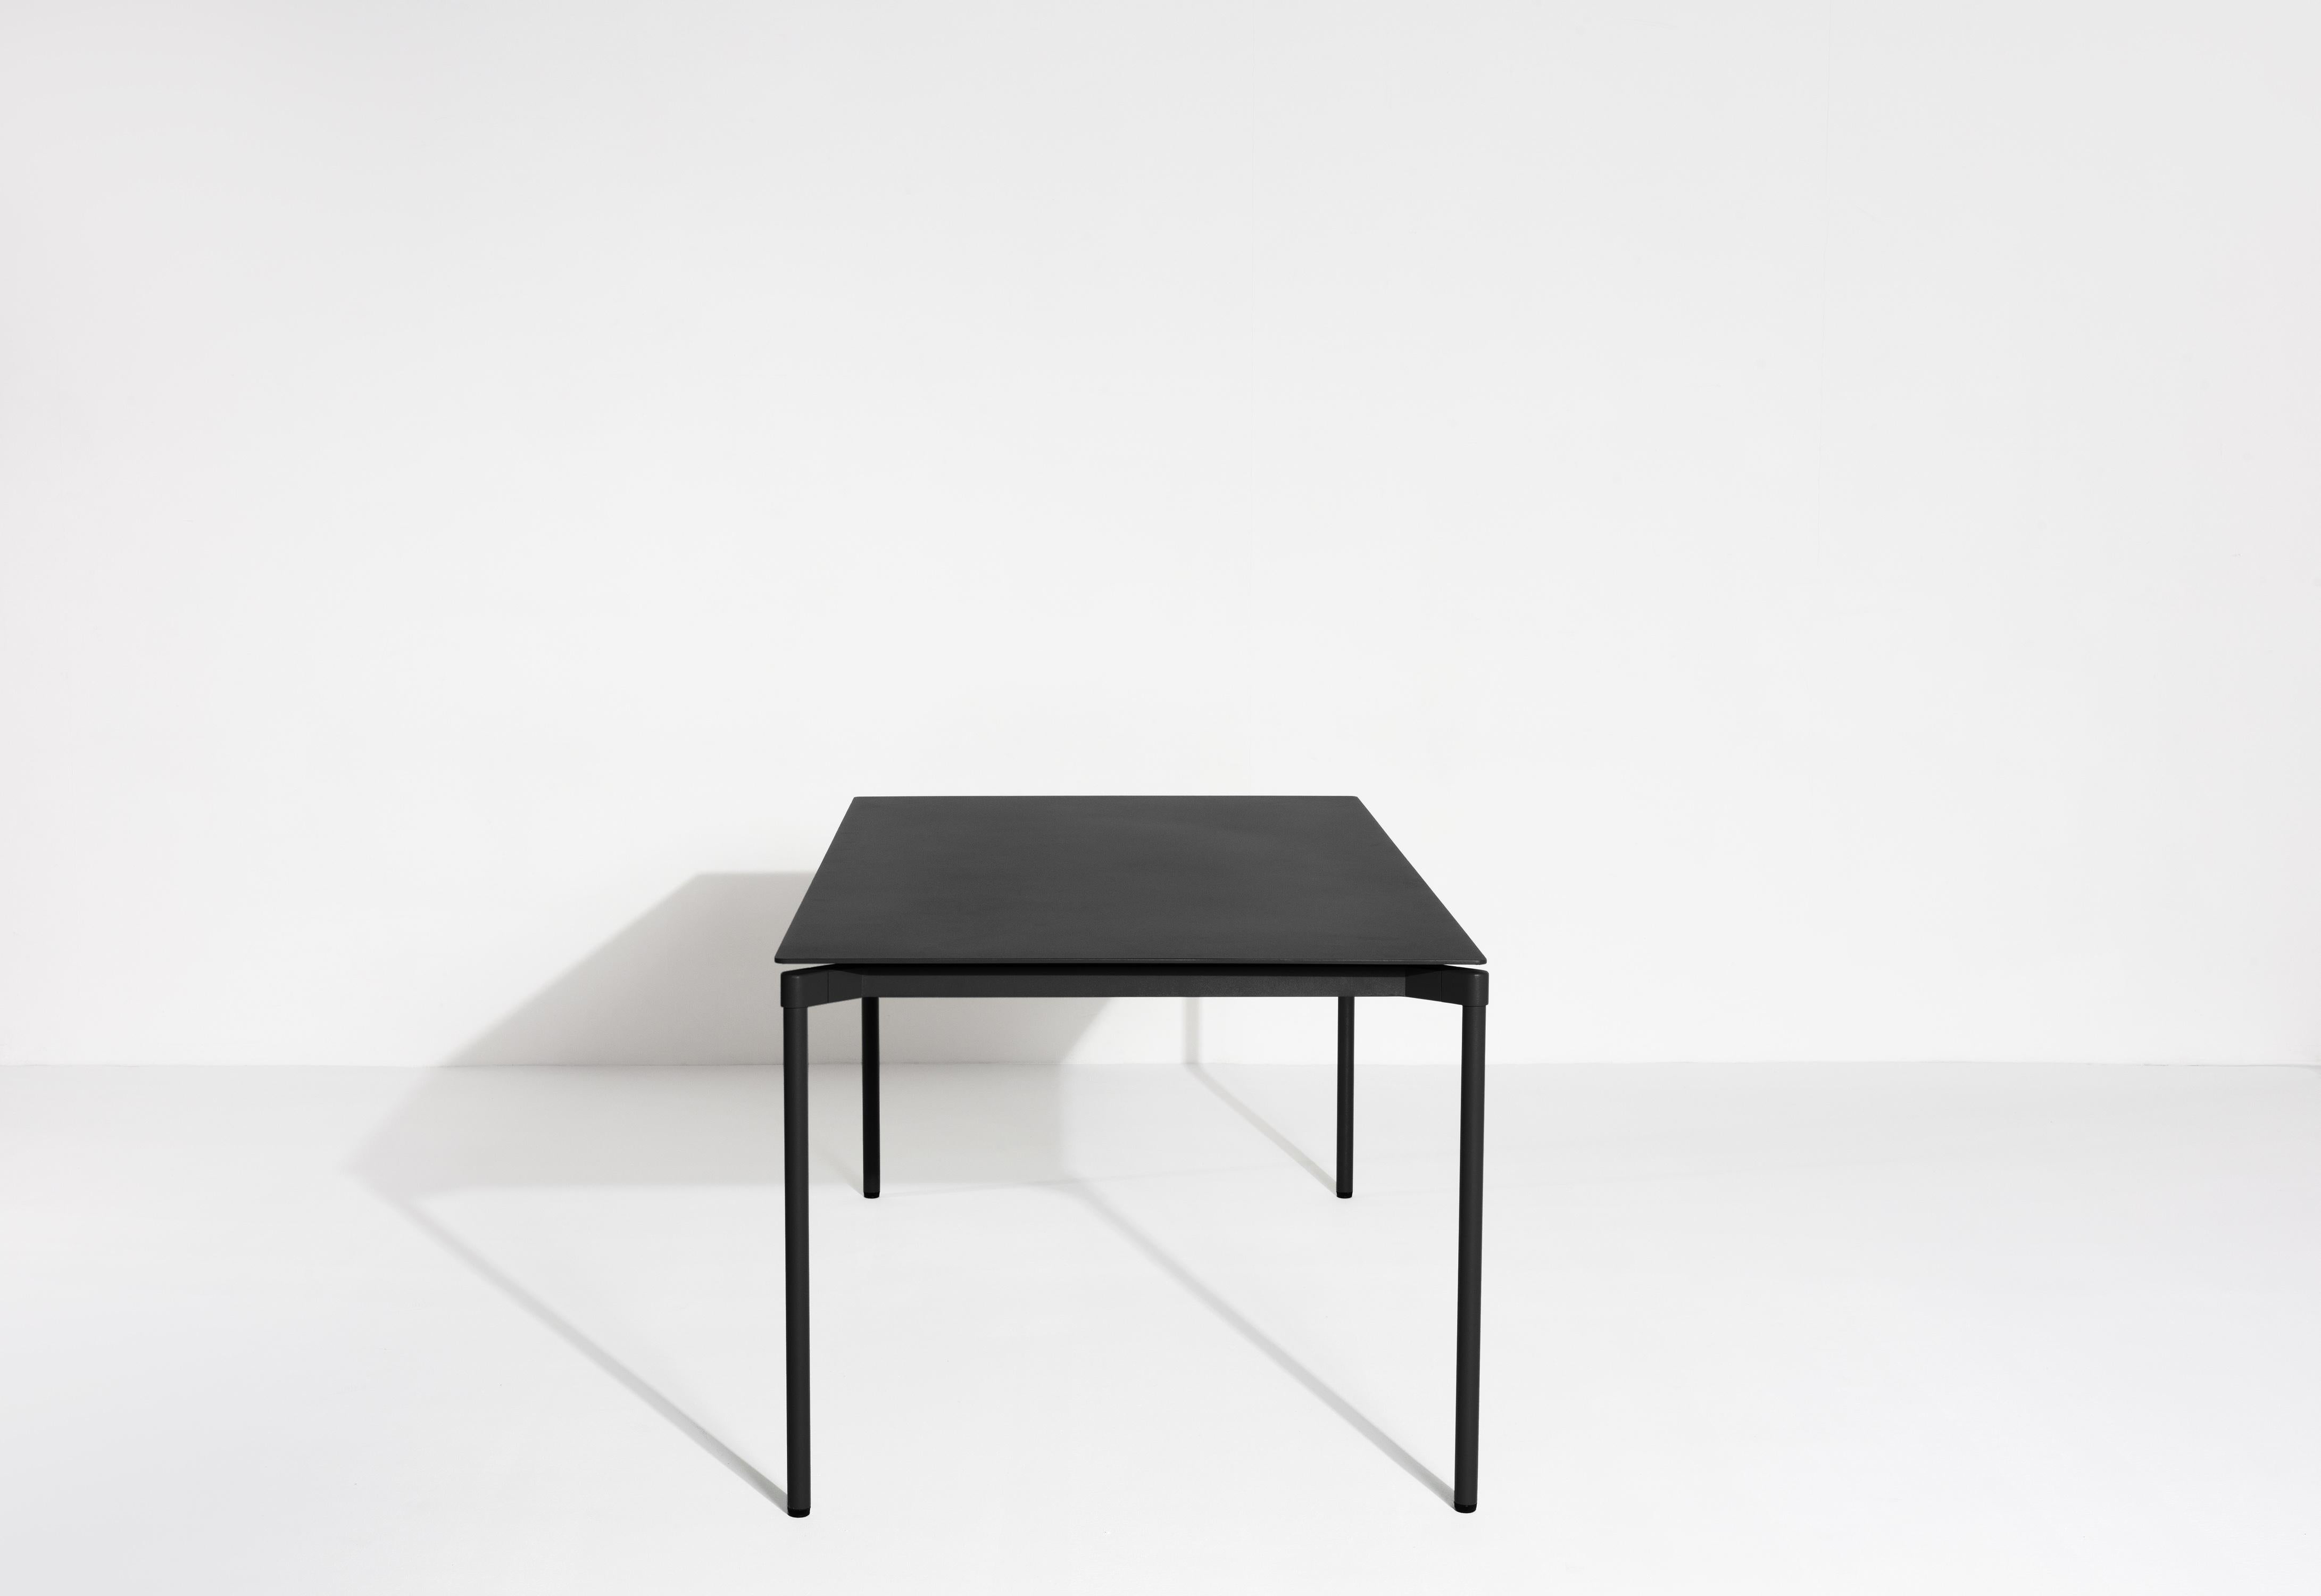 Chinese Petite Friture Fromme Rectangular Table in Black Aluminium by Tom Chung For Sale